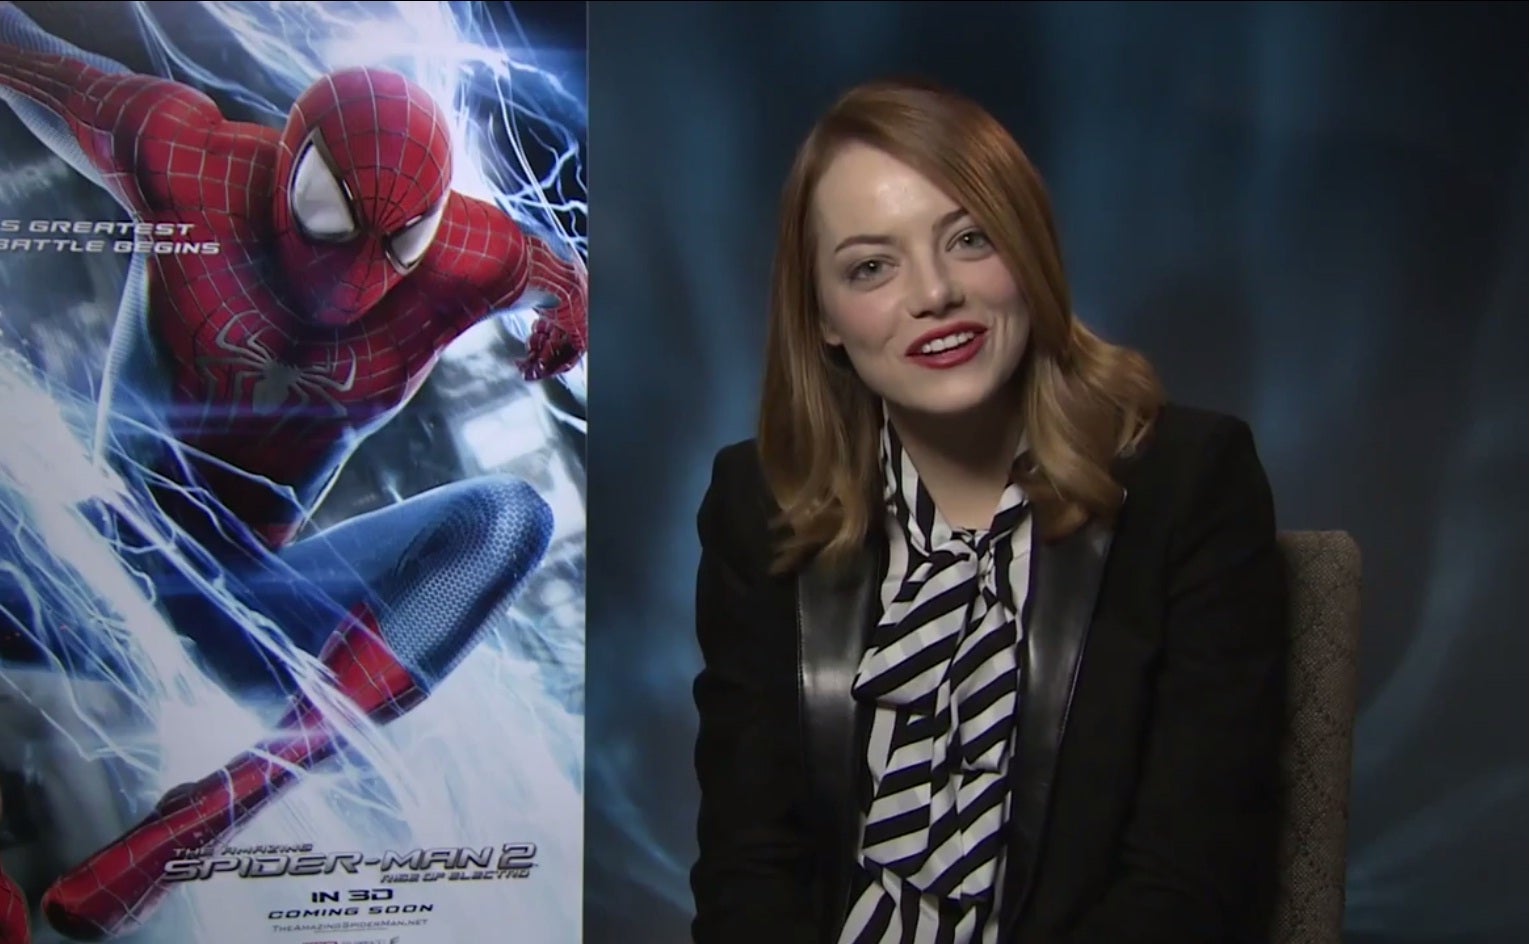 Emma Stone gets a welcome break from talking Spider-Man to deliver a wedding message